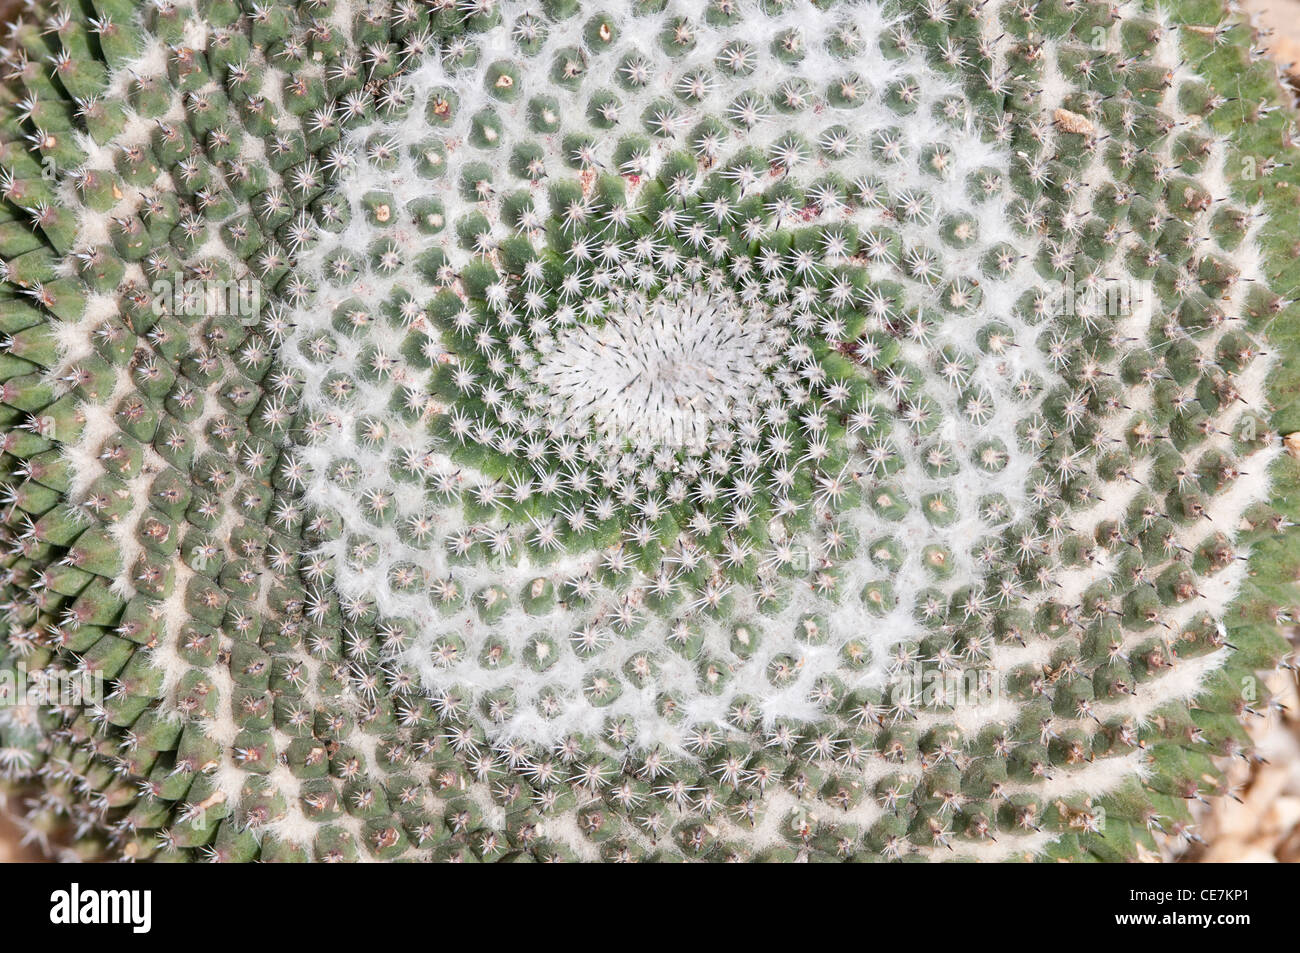 Close-up overhead view of spiral pattern of Old lady pincushion cactus, Mammillaria hahniana. Stock Photo